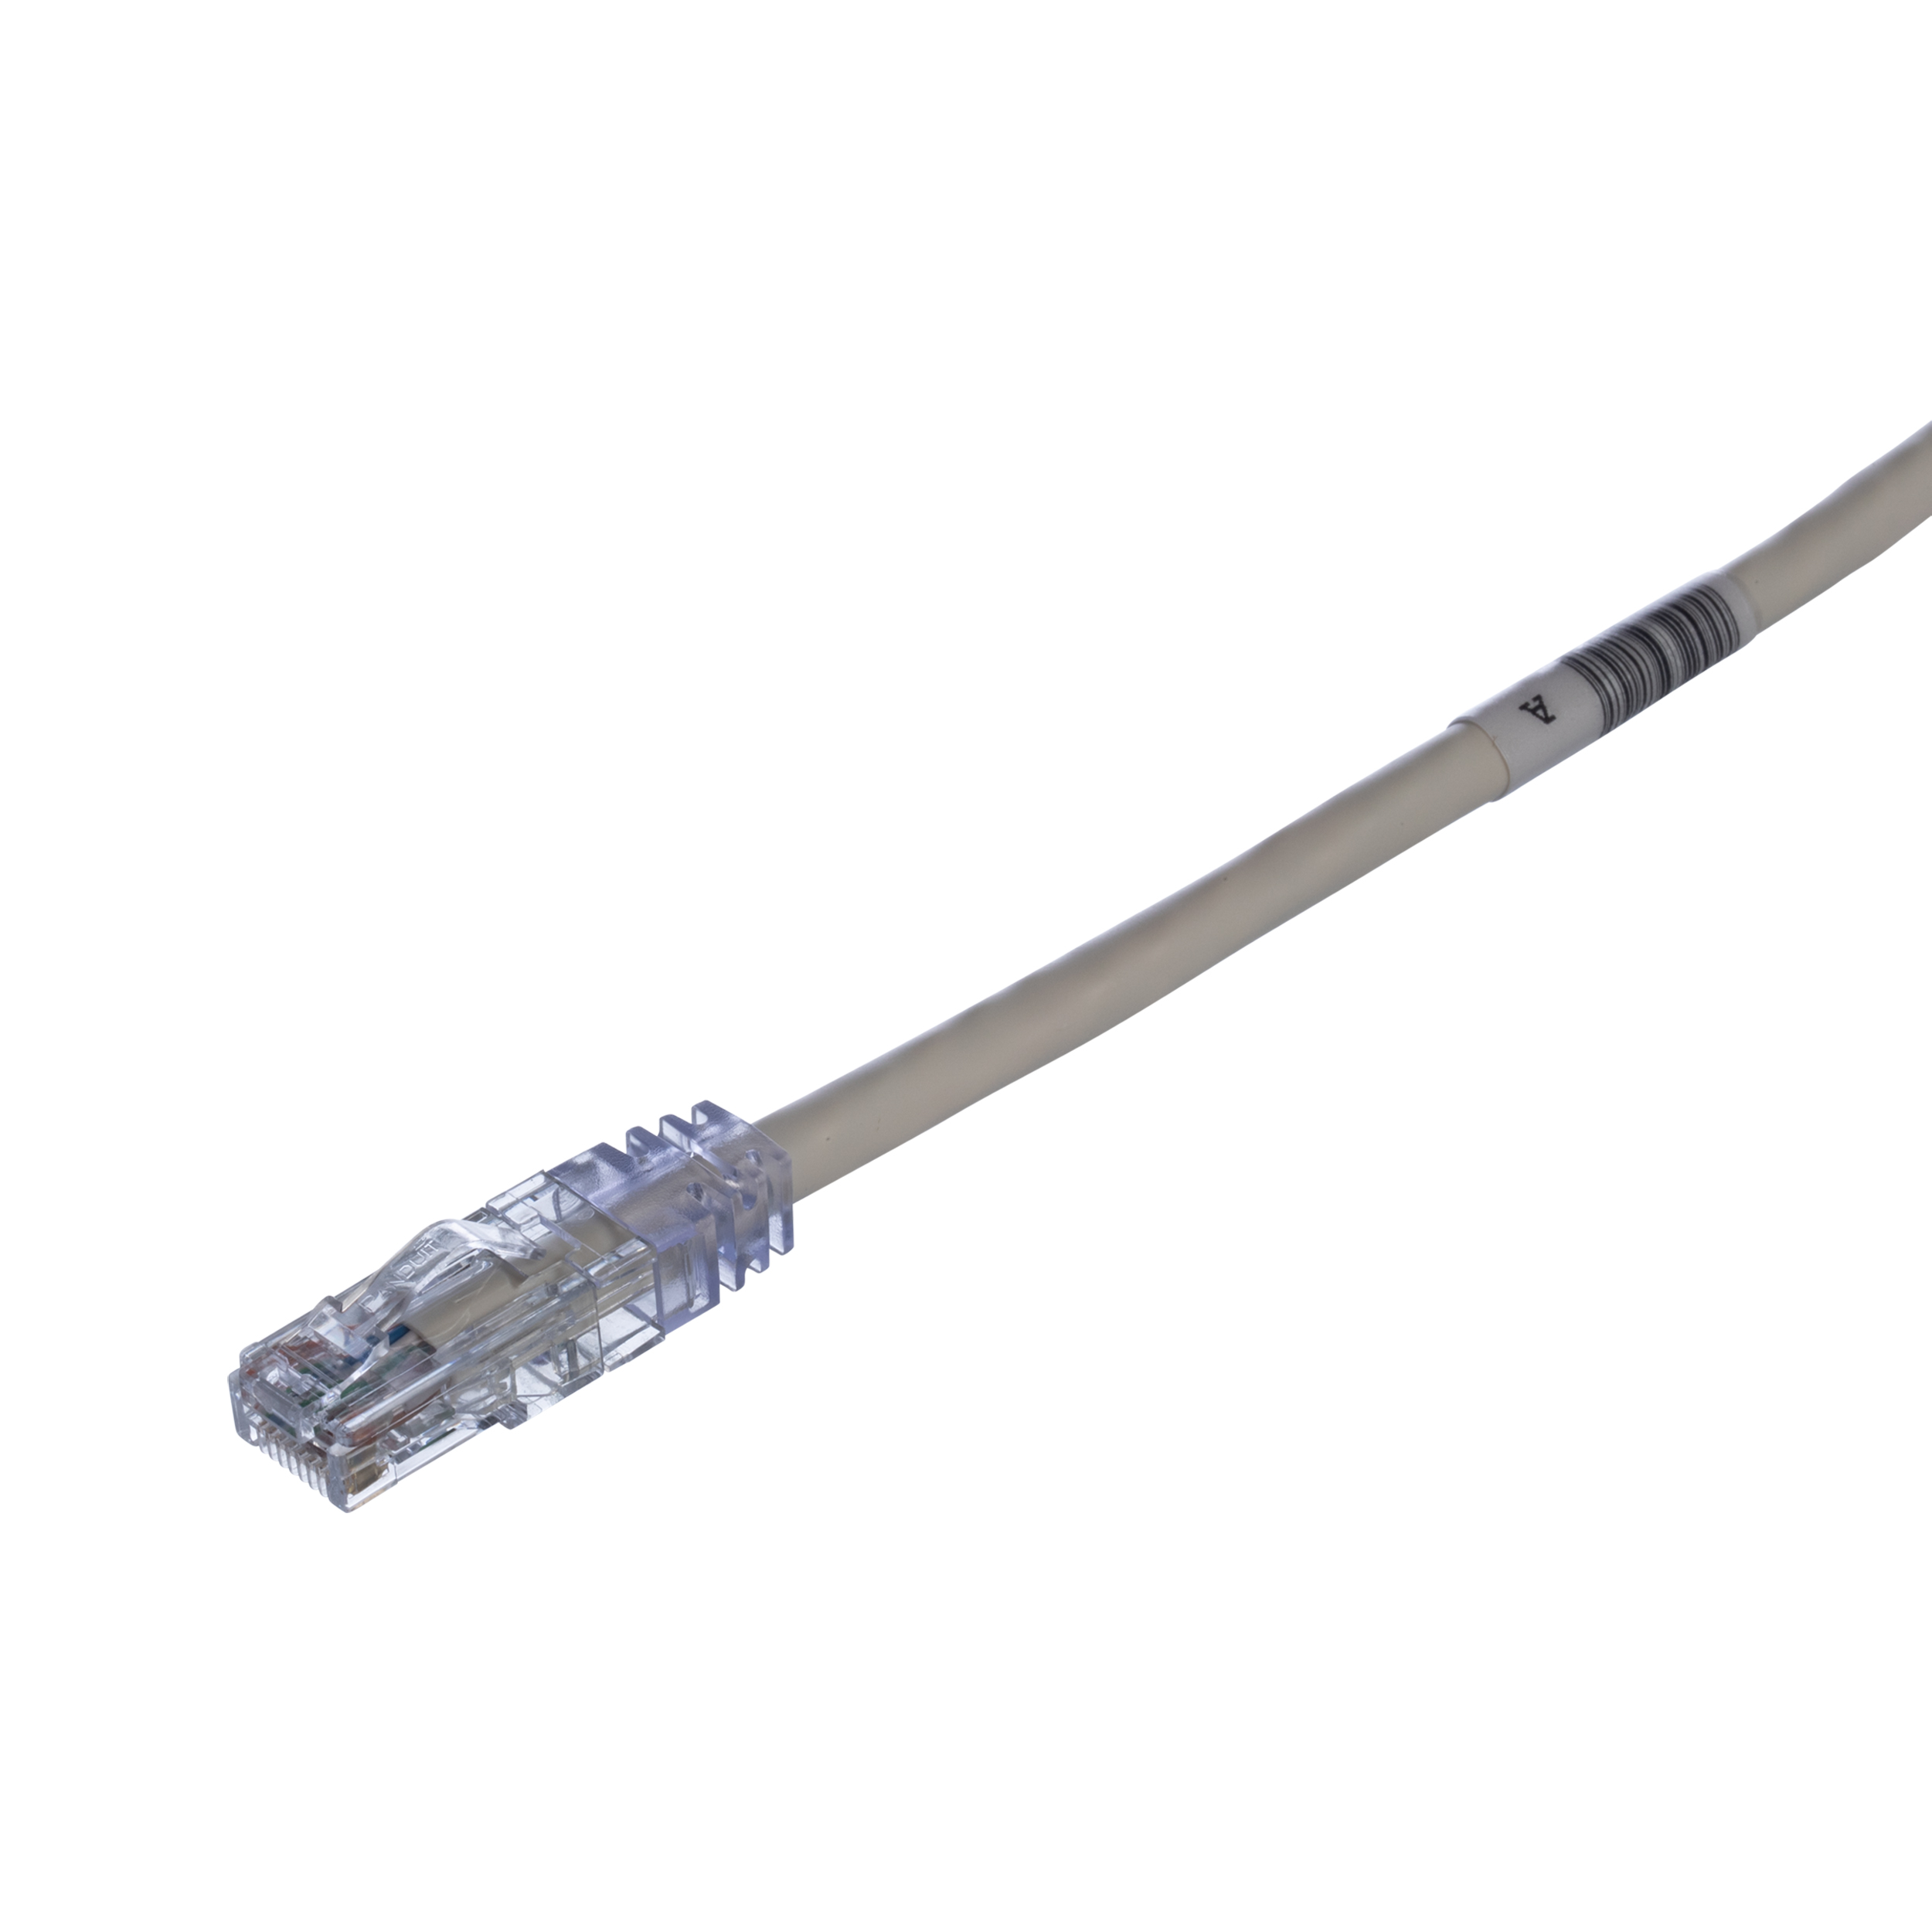 Cat 6 24 AWG UTP Copper Patch Cord, 1.5